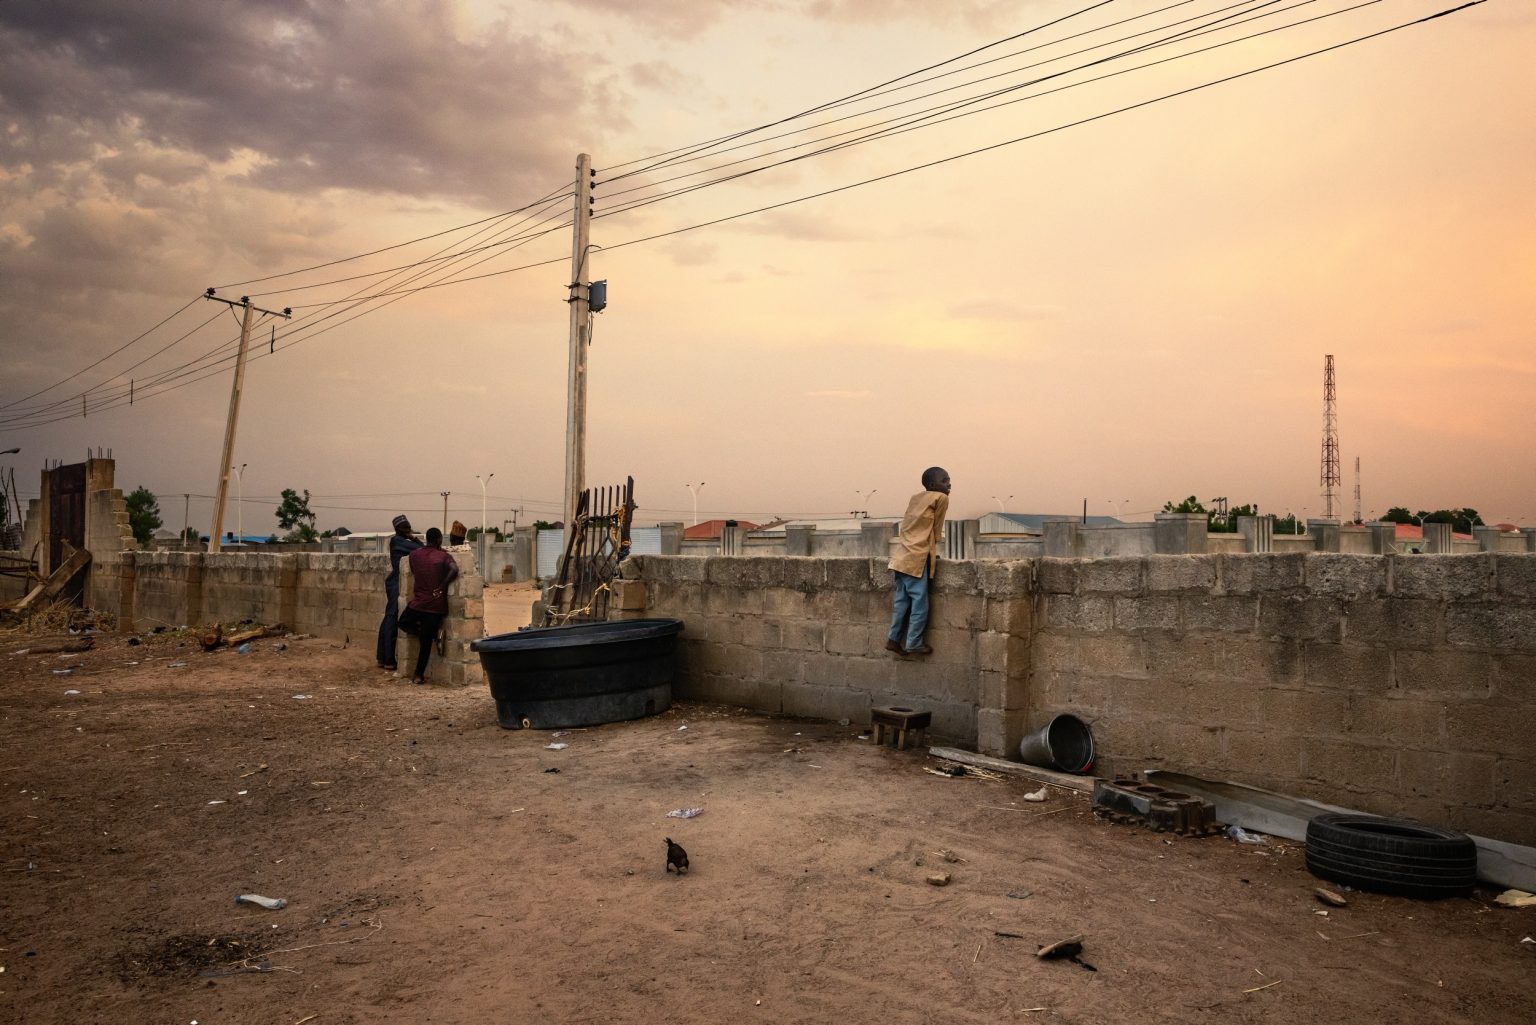 Maiduguri, Nigeria, Africa, May 2021 - A glimpse of Maiduguri, capital city of Borno State, which borders Cameroon, Chad and Niger. Borno State is the most affected by the violent acts of Boko Haram, and up until 2016 Maiduguri has been the epicenter of the insurgency. Today, tens of thousands of internal refugees (IDP) are flooding into the city due to the violence, and its population doubled to two millions. Although in town Boko Haram has been declared defeated, occasional attacks to communities are still being reported, and suicide bombers are continuing to target the so-called soft targets. ><
Maiduguri, Nigeria, Africa, maggio 2021 -  Uno scorcio di Maiduguri, capitale dello Stato di Borno, che confina con Camerun, Ciad e Niger. Il Borno State è il più colpito dalle violenze di Boko Haram e Maiduguri fino al 2016 è stata l'epicentro della rivolta. Oggi, decine di migliaia di sfollati interni si riversano in città a causa della violenza, la sua popolazione è raddoppiata a due milioni. Anche se in città Boko-Haram è stato dichiarato sconfitto, tuttora vengono costantemente segnalati attacchi sporadici a comunità e attentatori suicidi continuano a colpire i cosiddetti obiettivi soft.